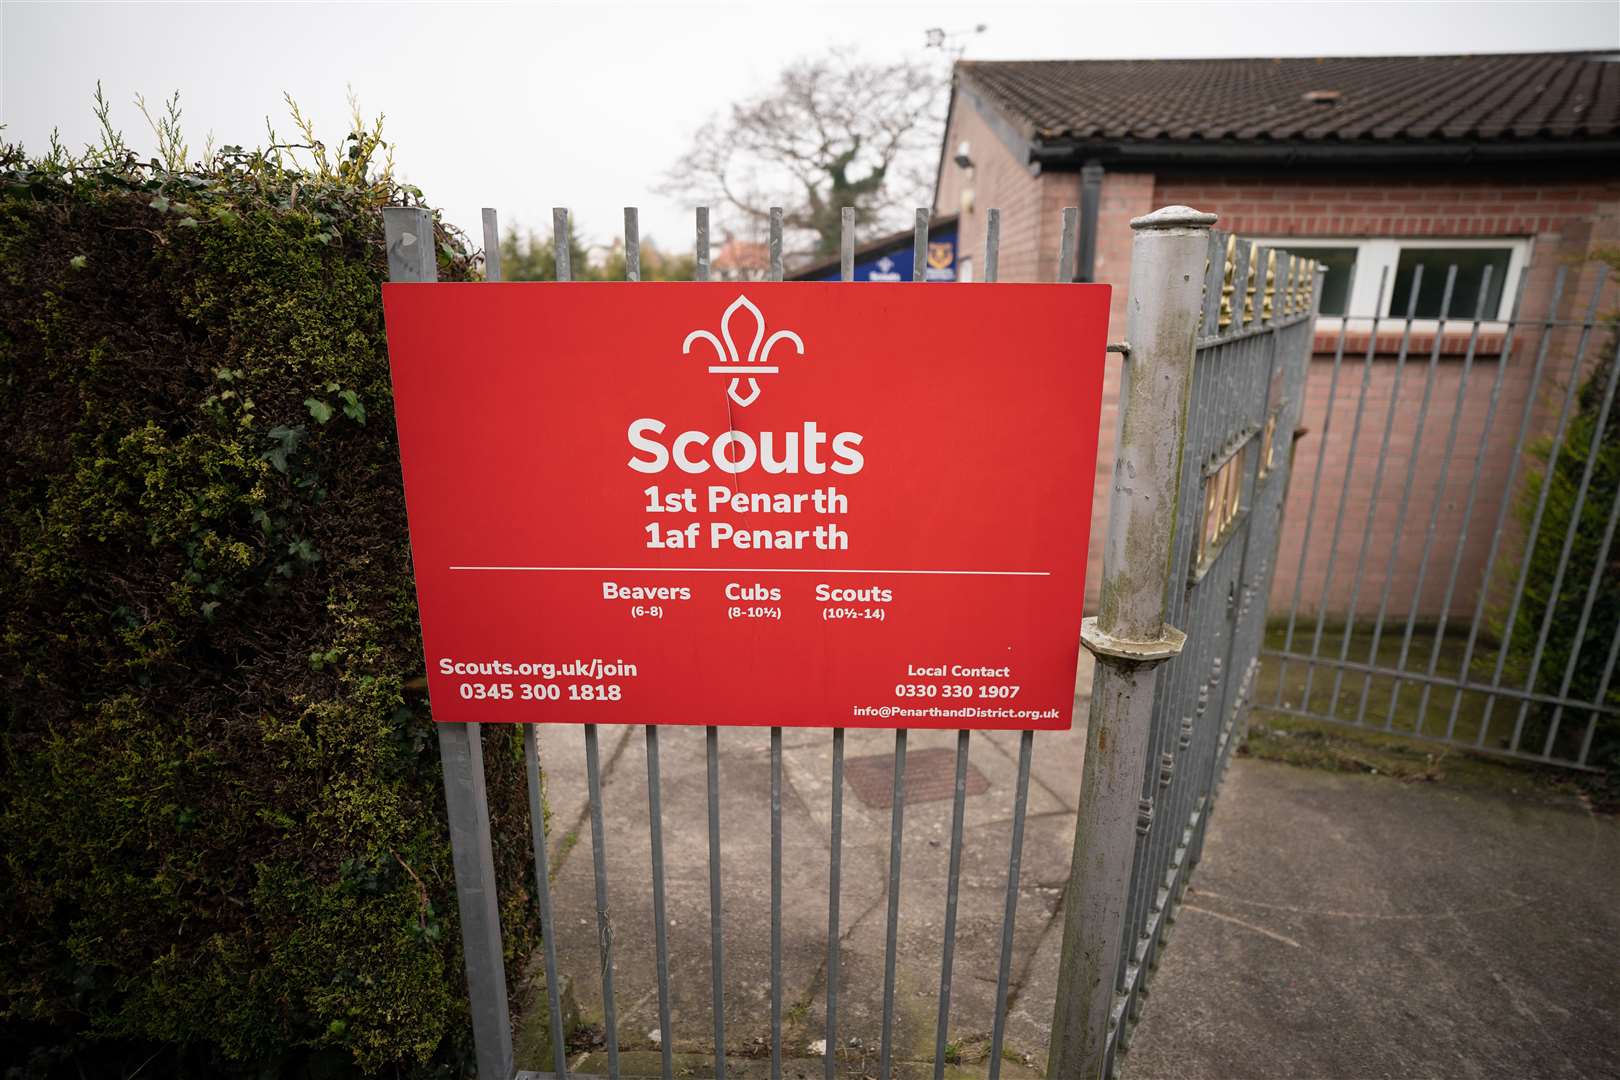 Penarth and District Scouts Association (PADSAC) activity centre in Penarth where Phillip Perks, 55, from Dinas Powys, South Wales, was a Scout leader for 20 years (Ben Birchall/PA)